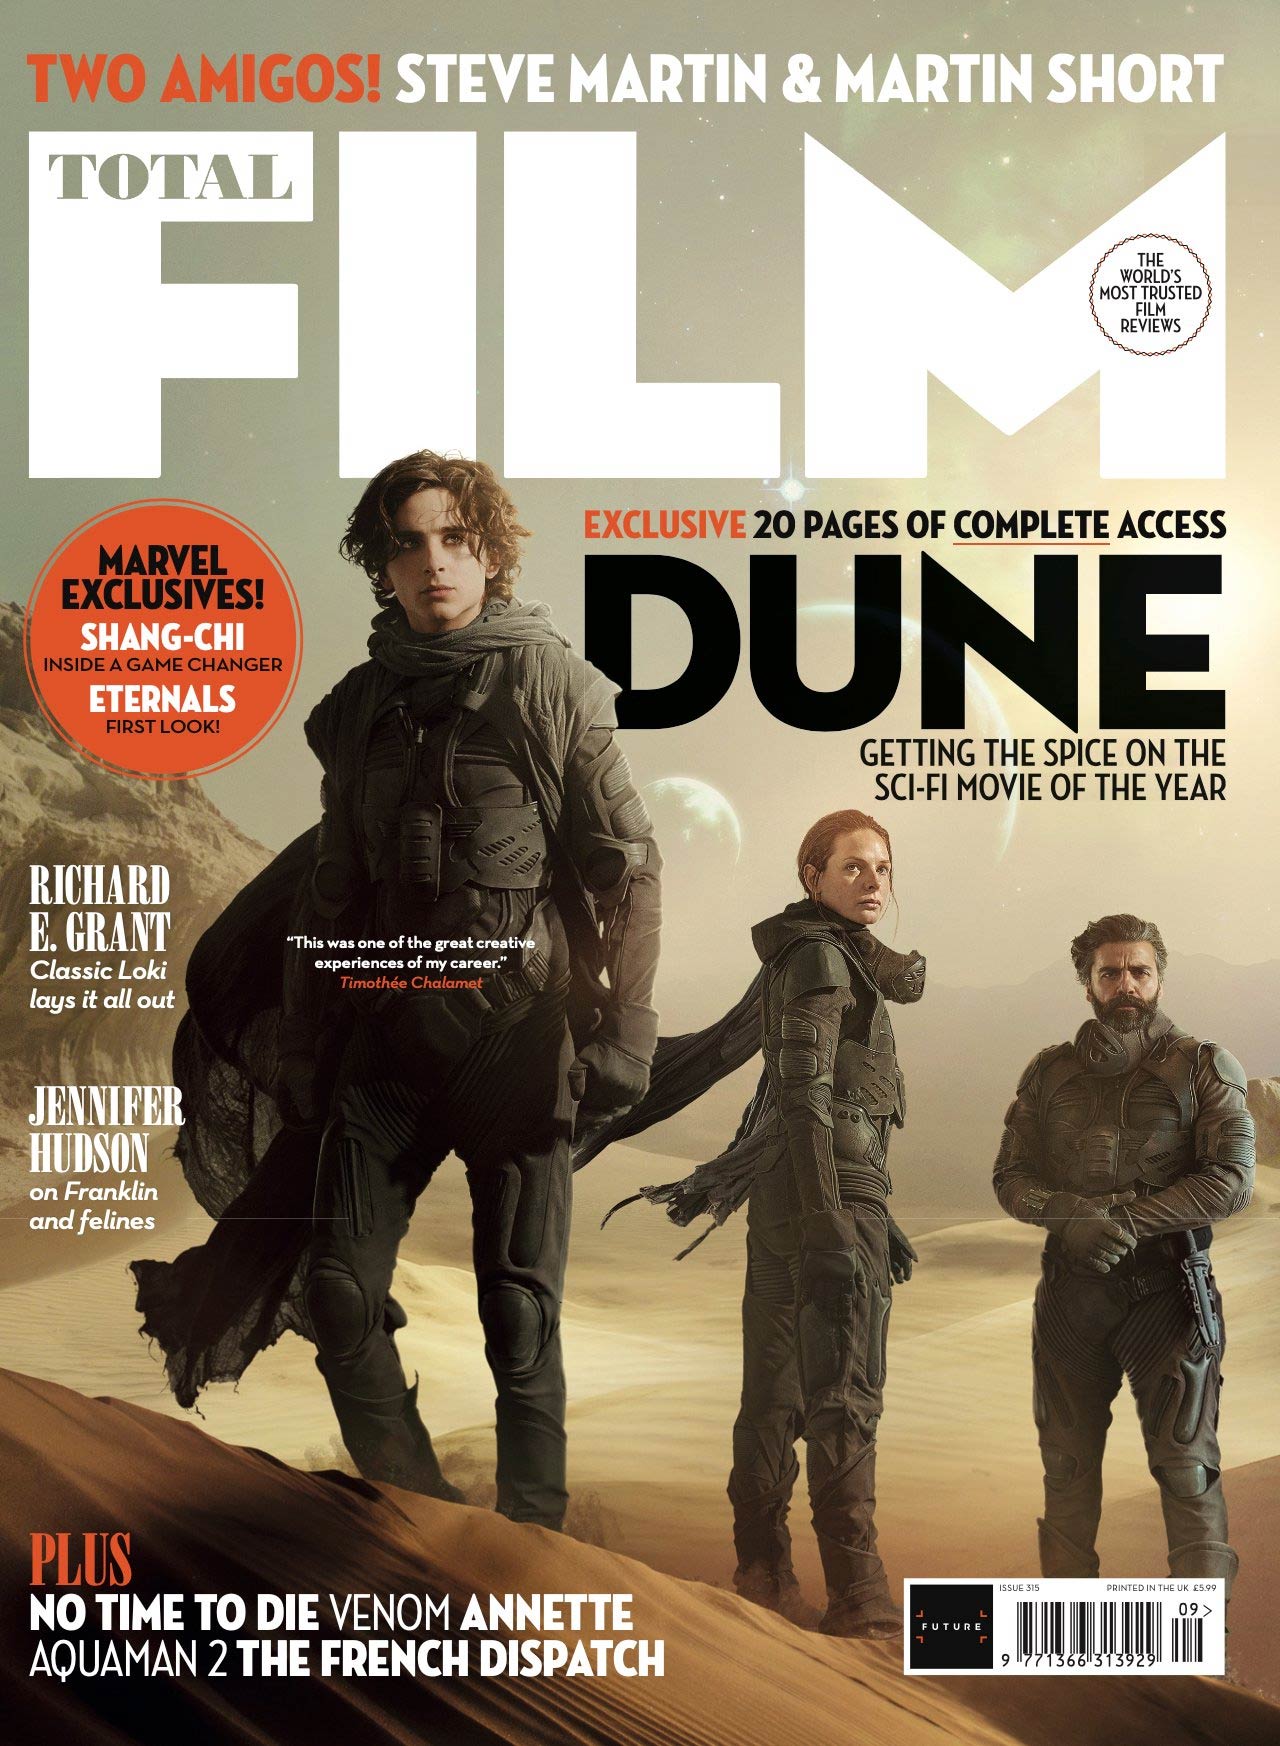 Main cover for Total Film Magazine's Dune movie issue (August 2021).